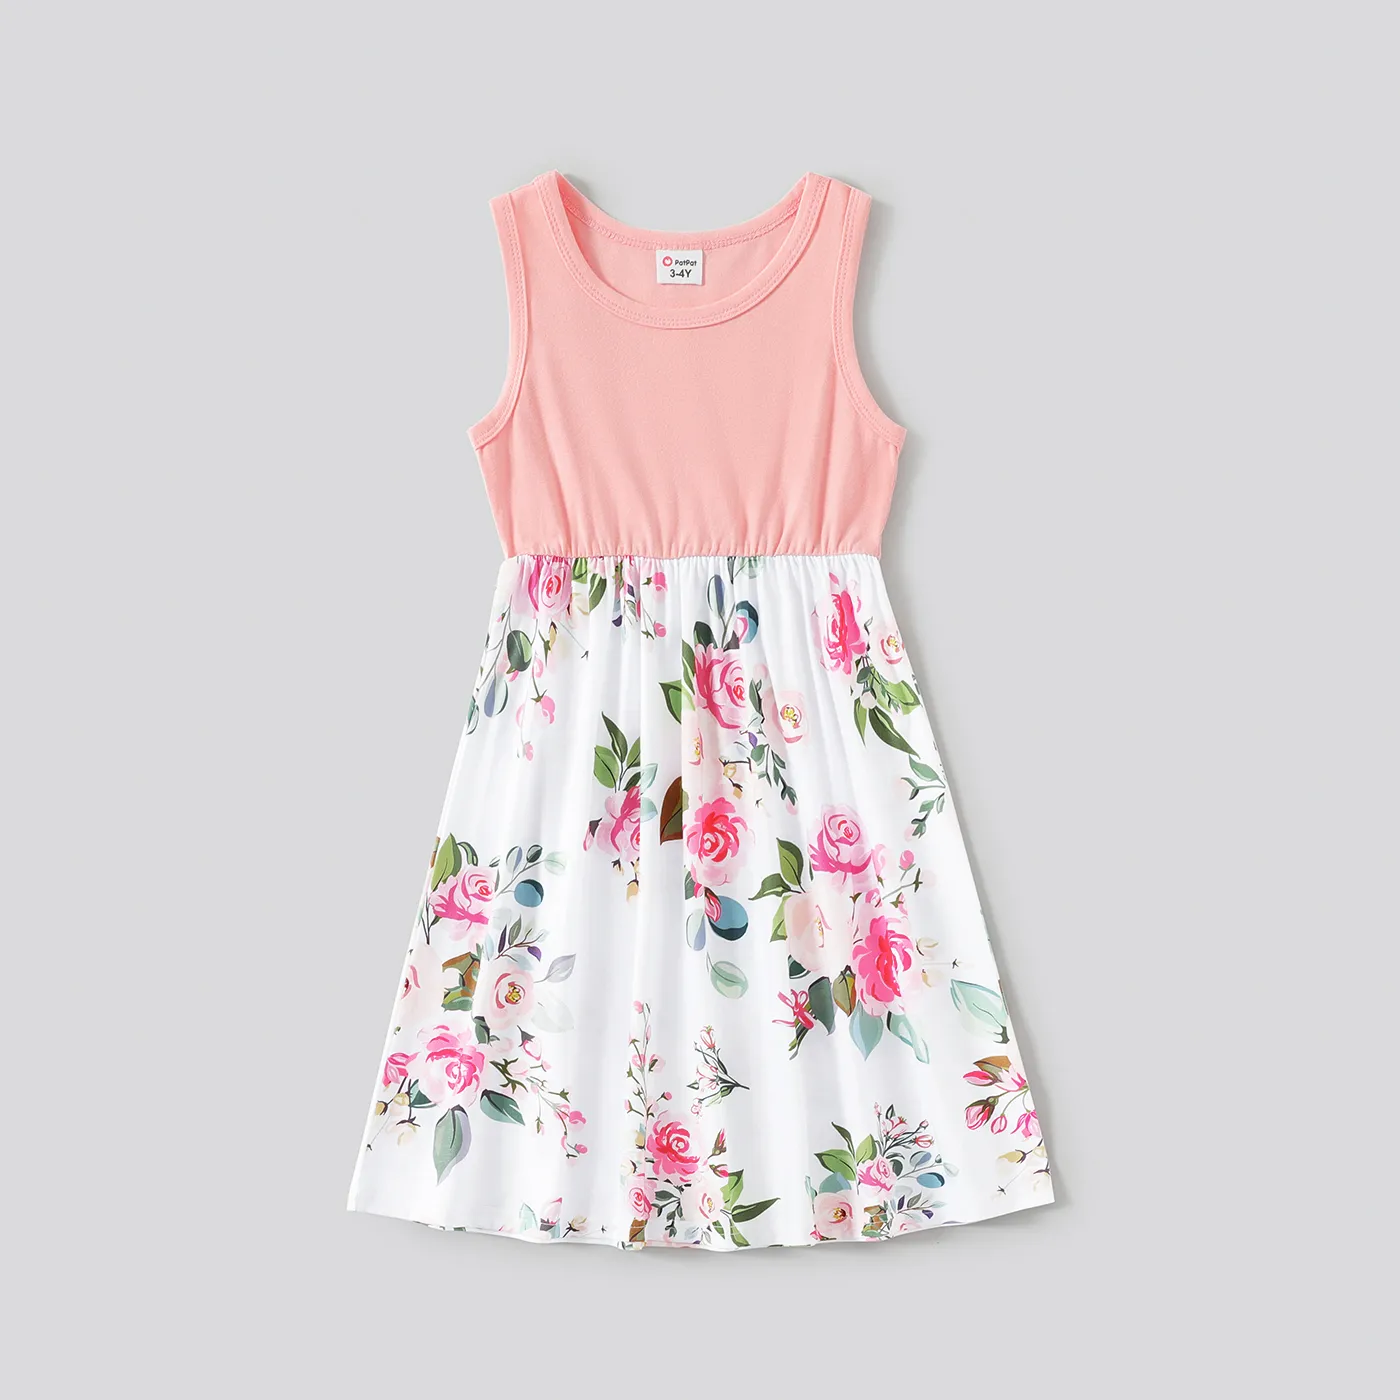 Family Matching Pink Sleeveless Splicing Floral Print Midi Dresses And Colorblock Short-sleeve Polo Shirts Sets